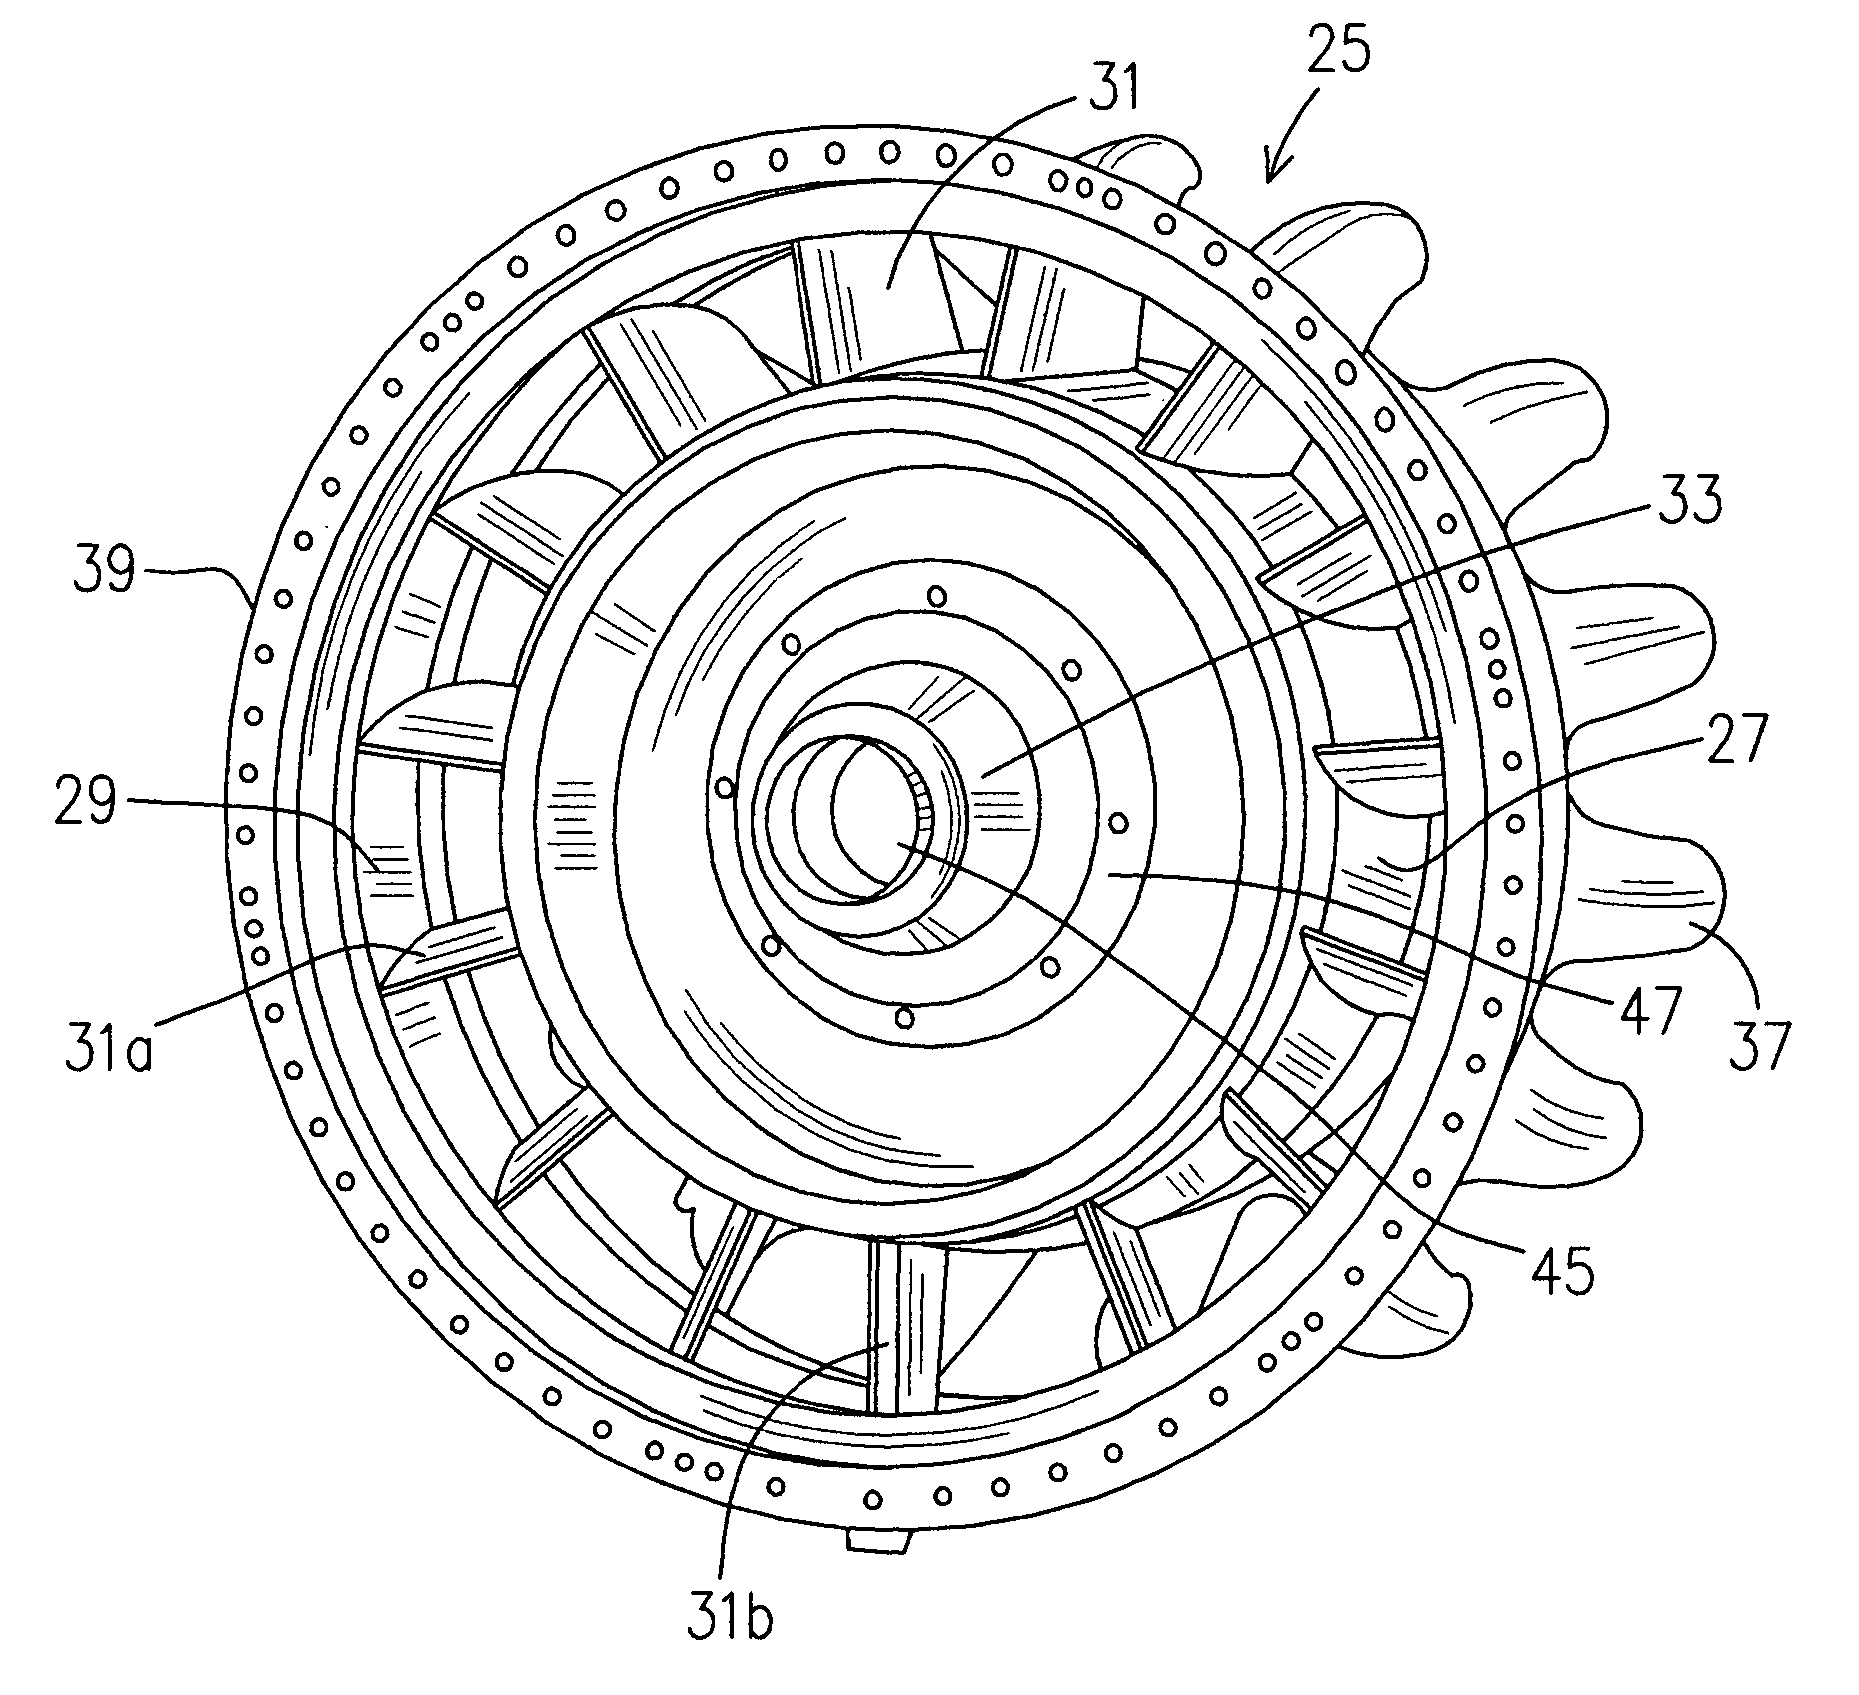 Turbine exhaust case and method of making